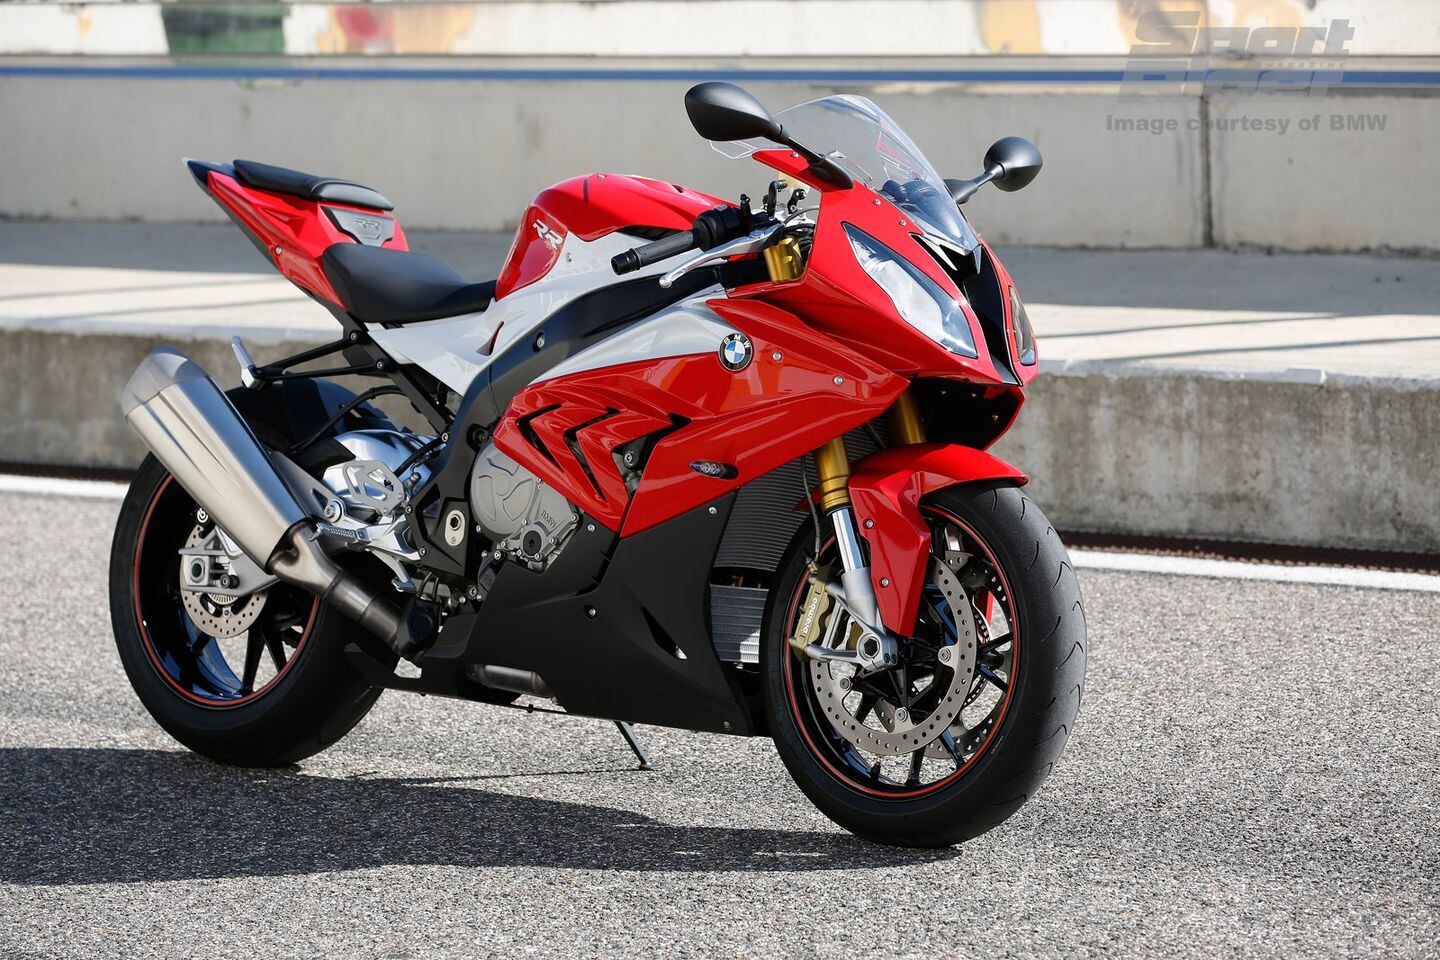 BMW Announces Updated S 1000 RR for 2015